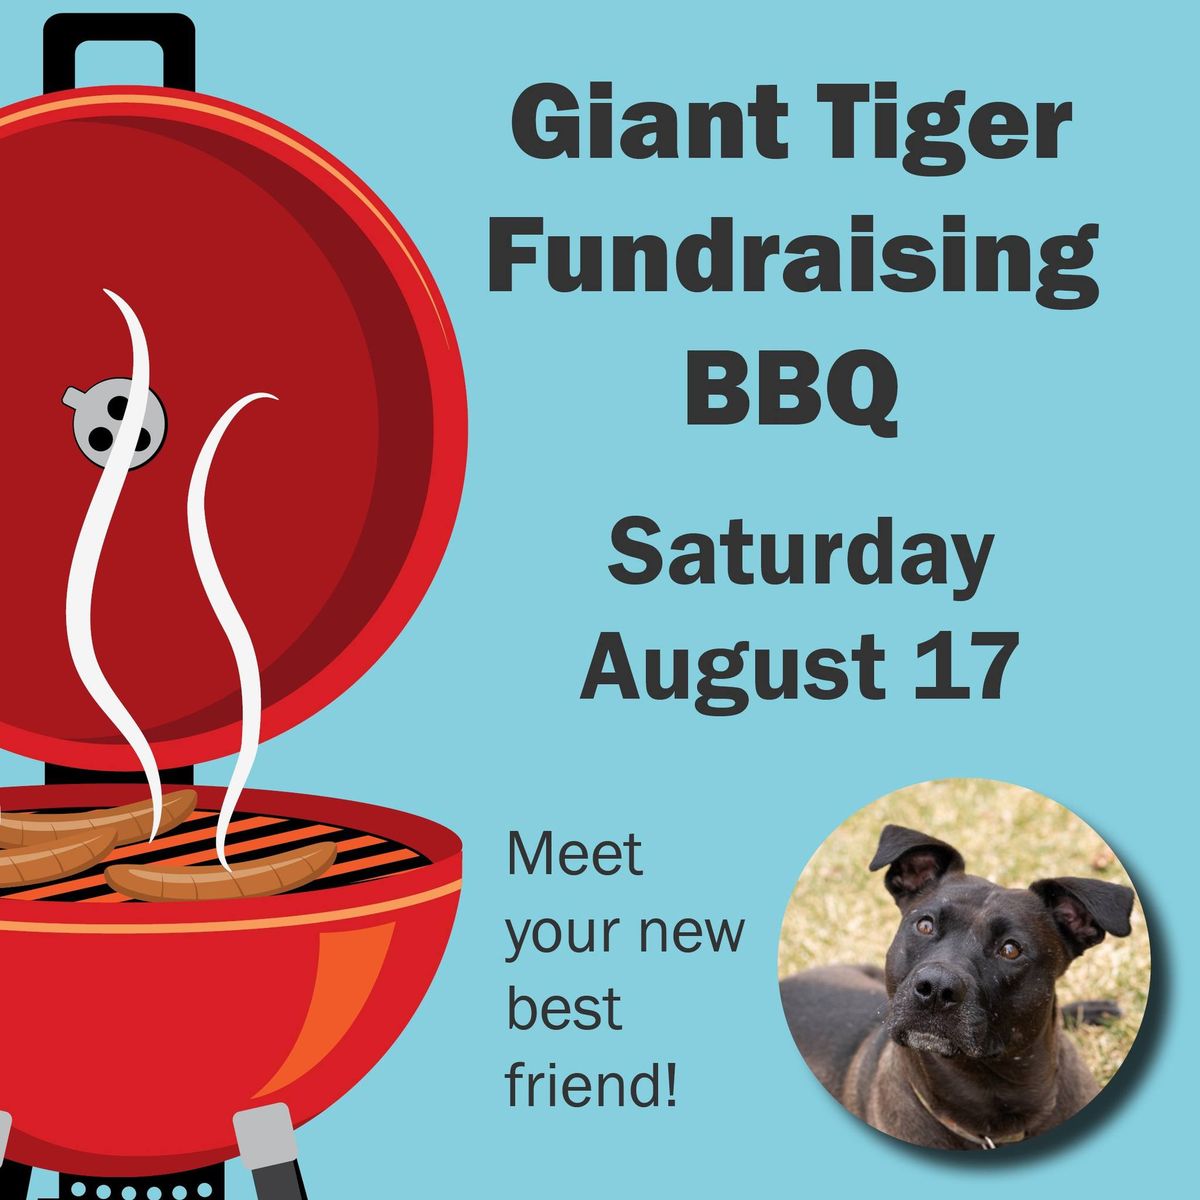 Giant Tiger Fundraising BBQ